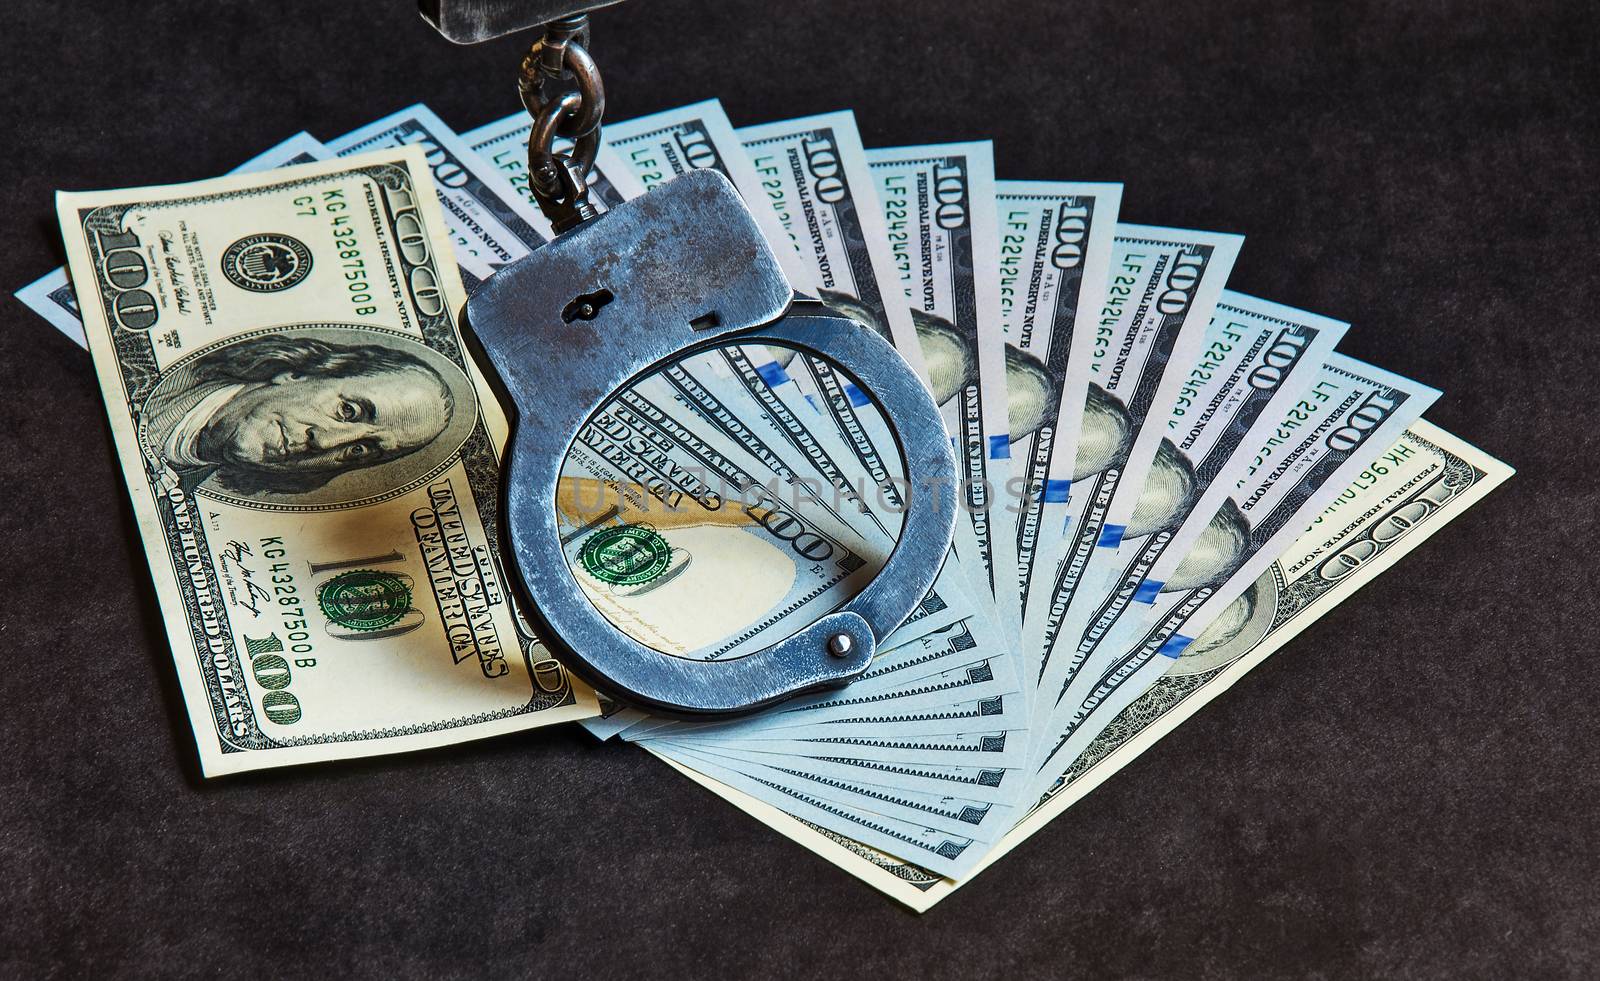 Metal handcuffs on the US currency bills

